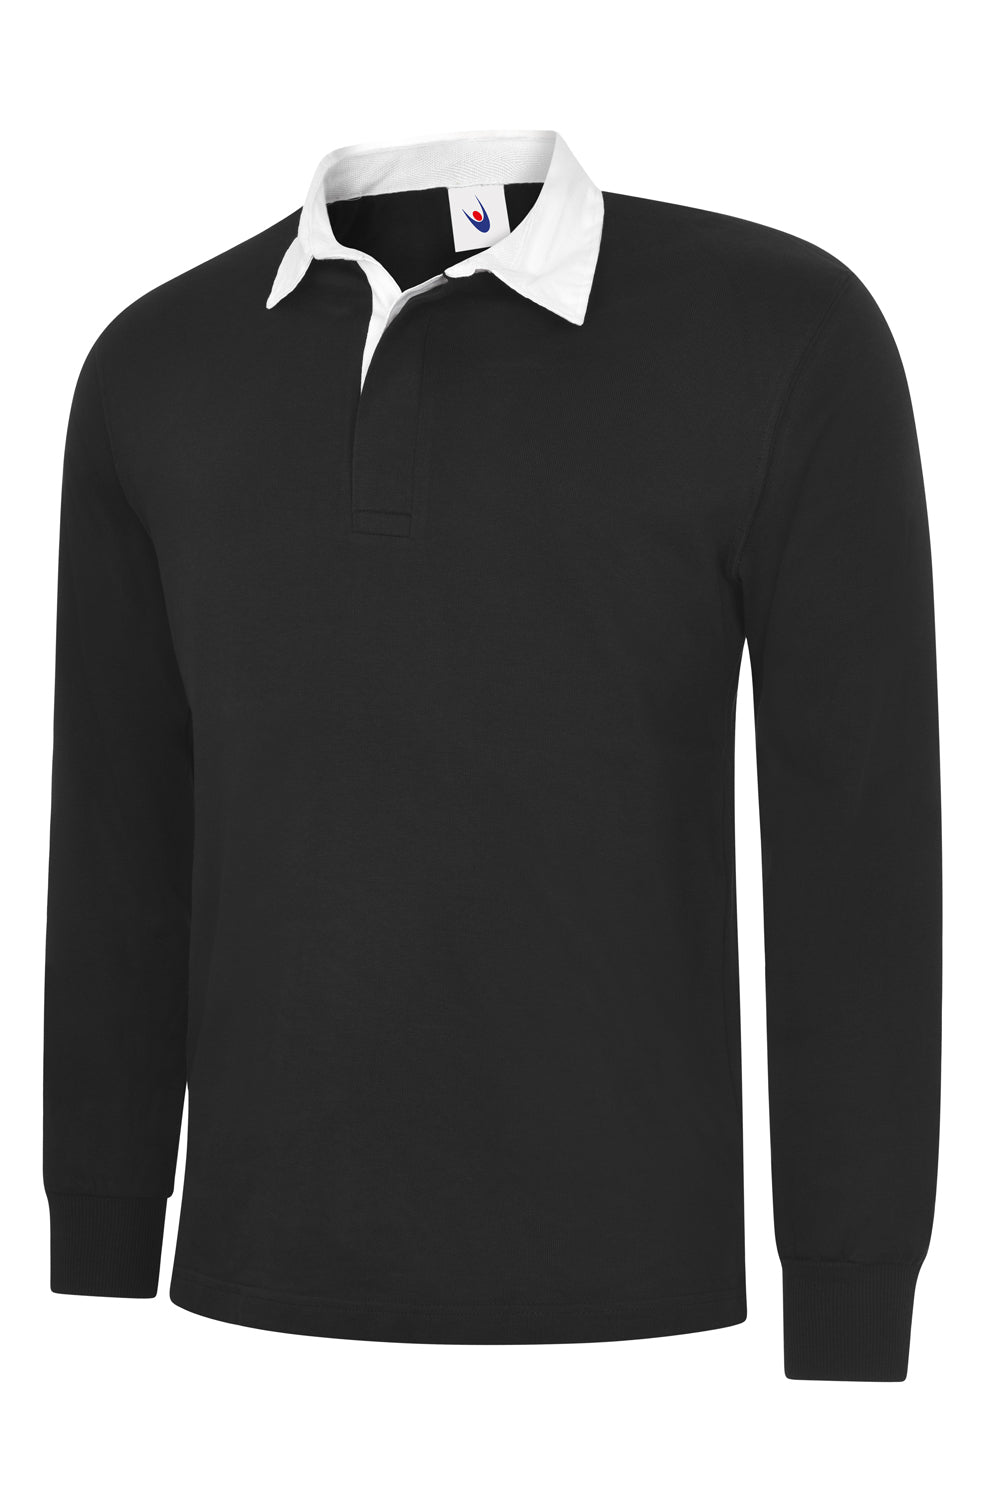 Uneek Classic Rugby Shirt (UC402)